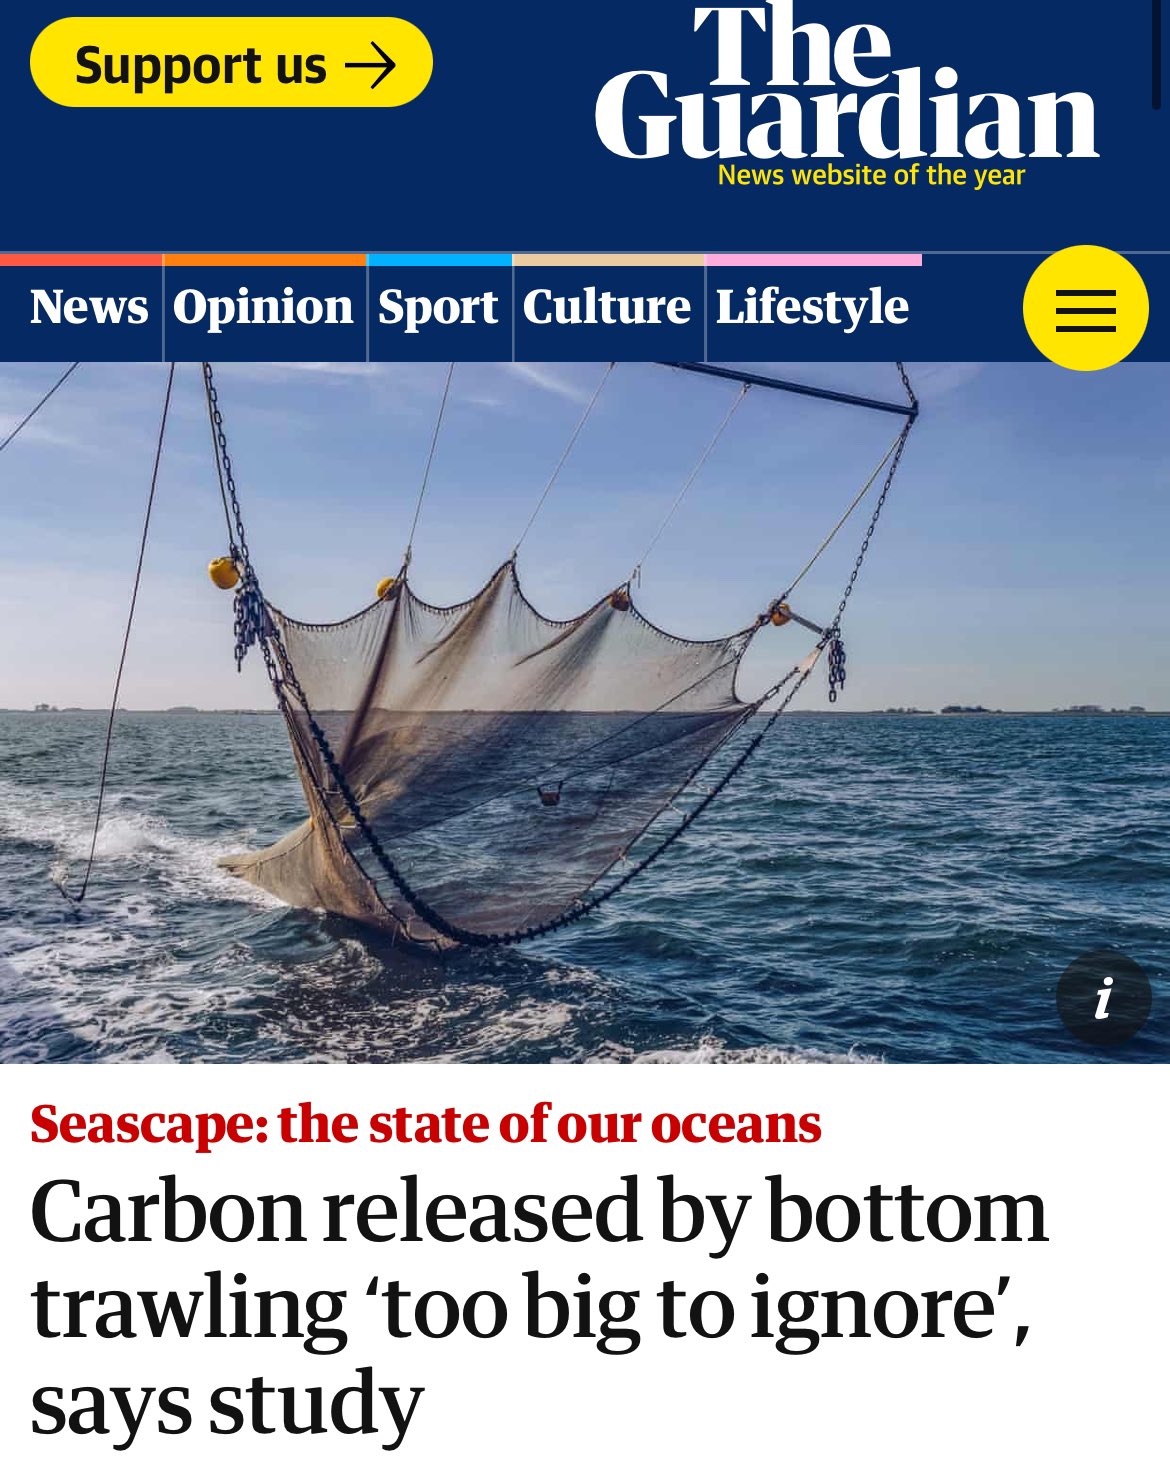 Carbon released by bottom trawling 'too big to ignore', says study